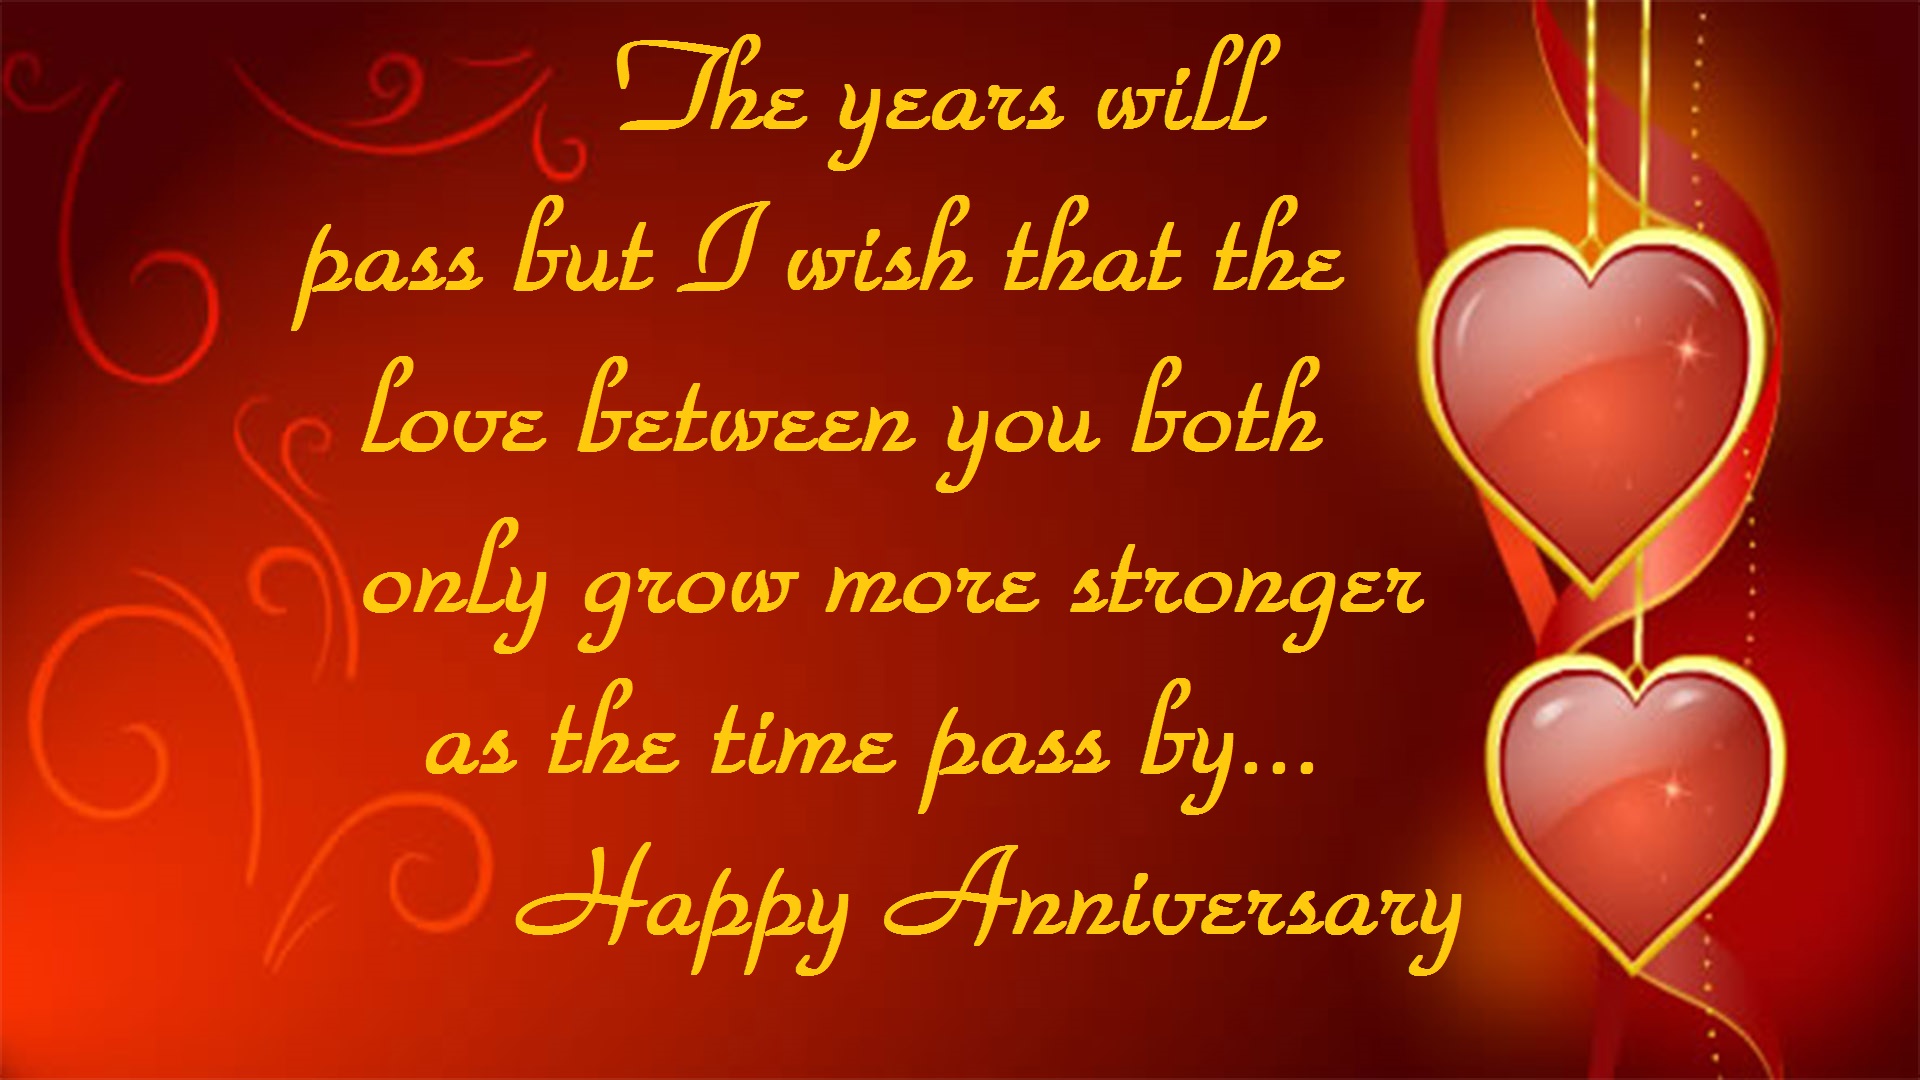 Happy Wedding Anniversary Wishes To a Couple hd image